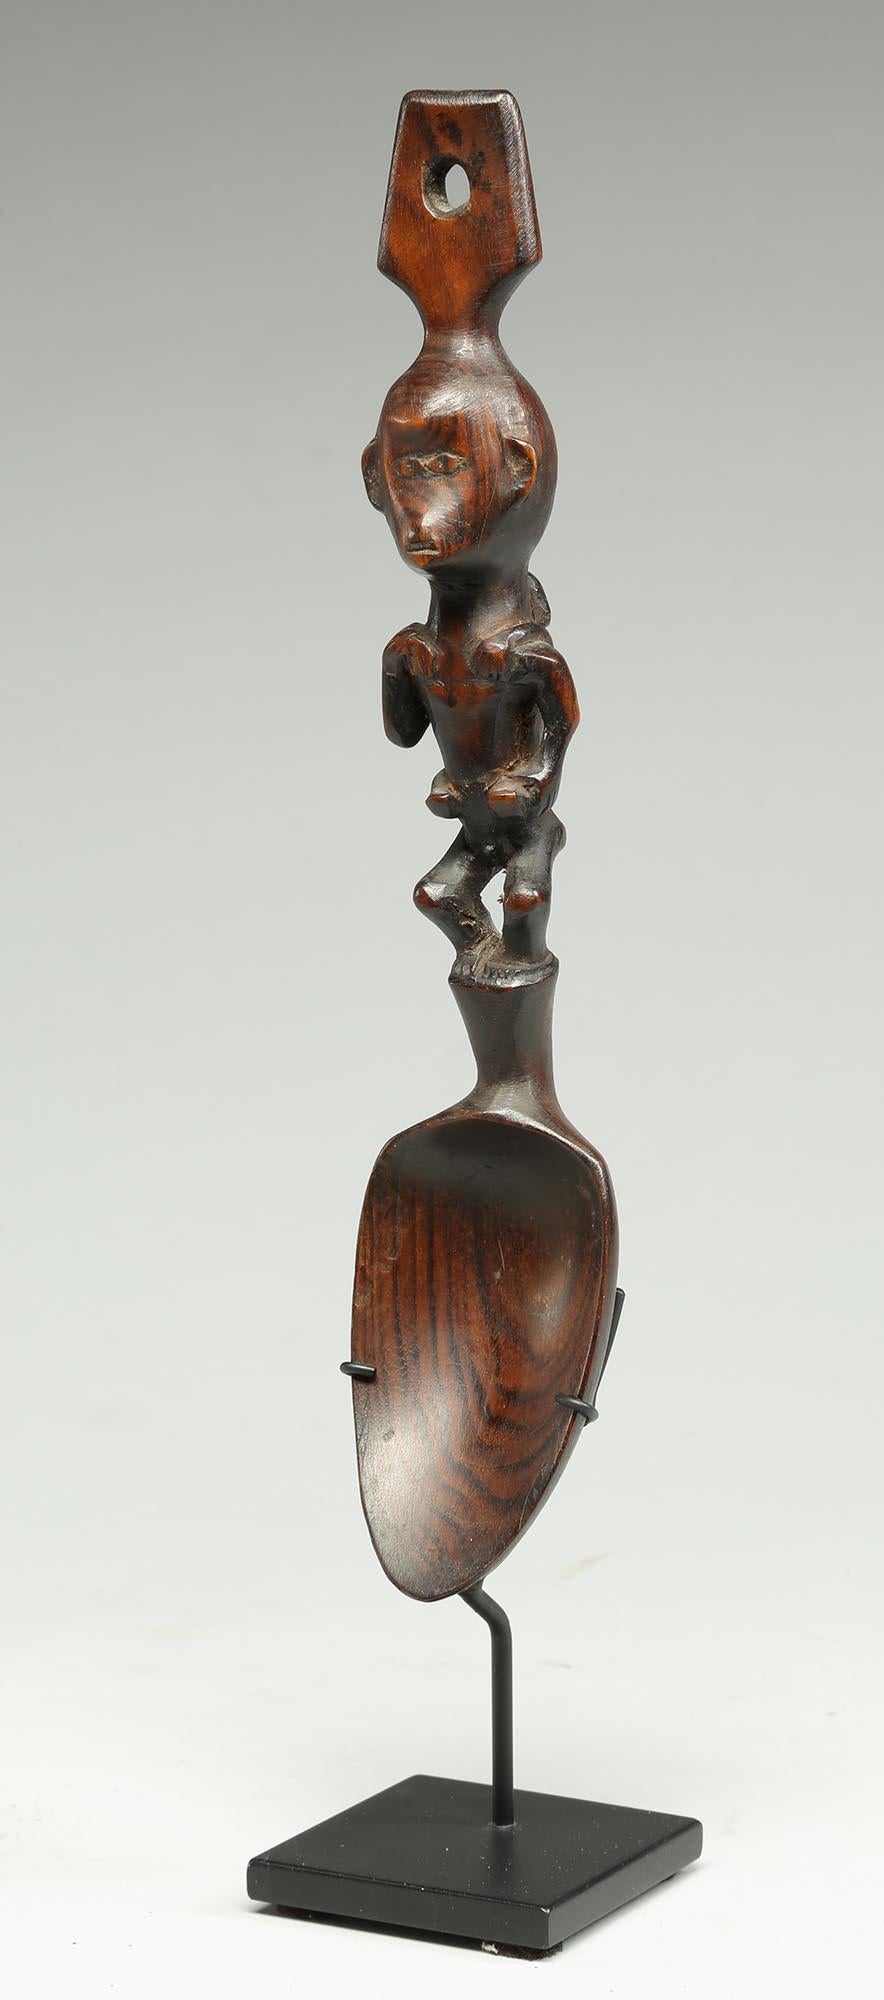 Hand-Carved Old worn Philippine Spoon with Monkey Maternity Mother Figure with Baby on Back